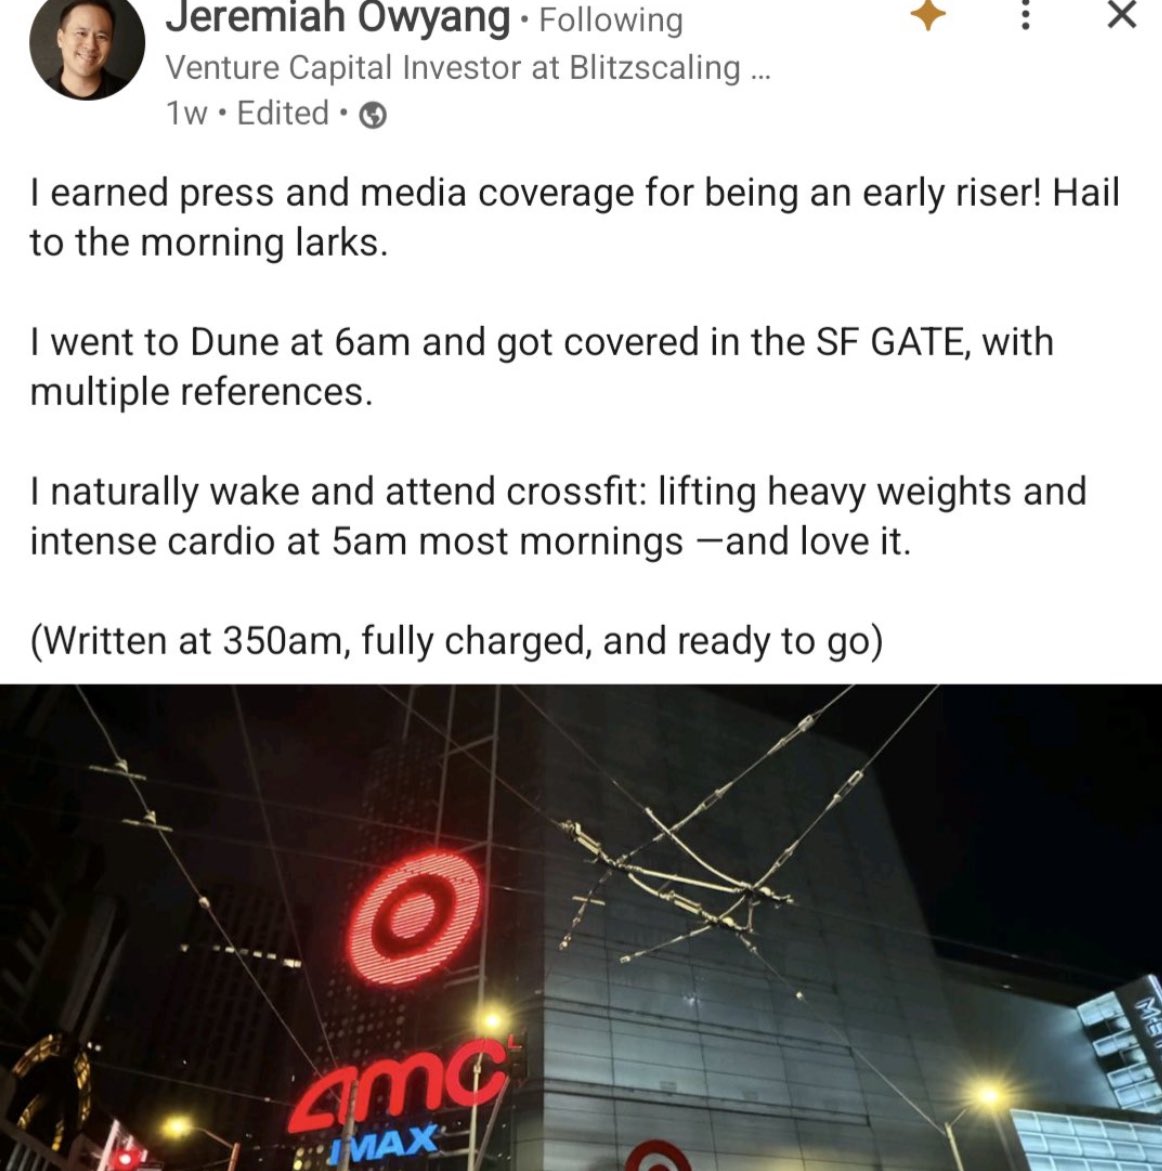 night - Jeremiah Owyang. ing Venture Capital Investor at Blitzscaling... 1w Edited I earned press and media coverage for being an early riser! Hail to the morning larks. I went to Dune at 6am and got covered in the Sf Gate, with multiple references. I nat